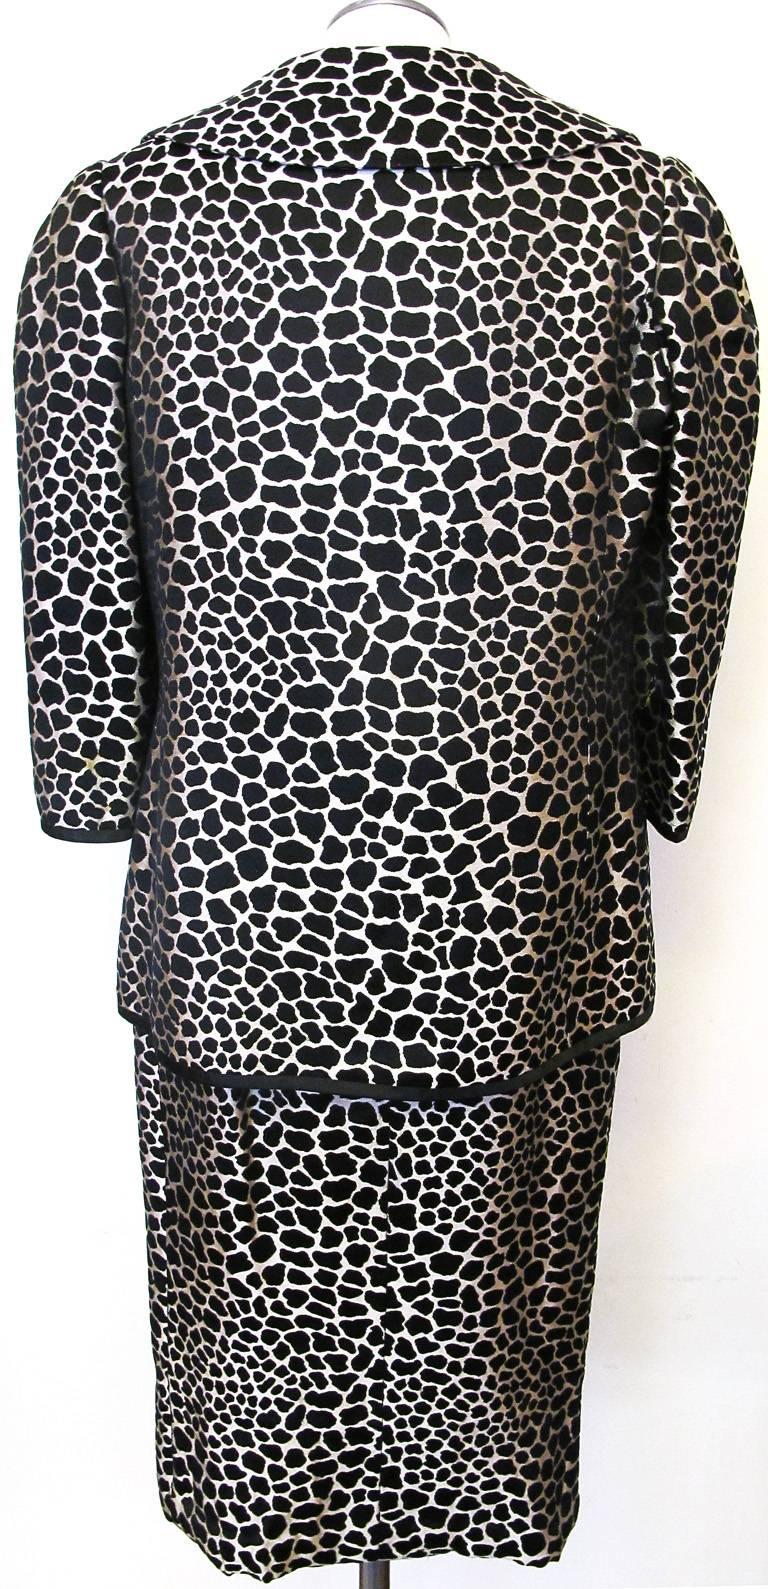 Women's Galanos Black and White Giraffe Print Sleeveless Dress with Matching Jacket For Sale